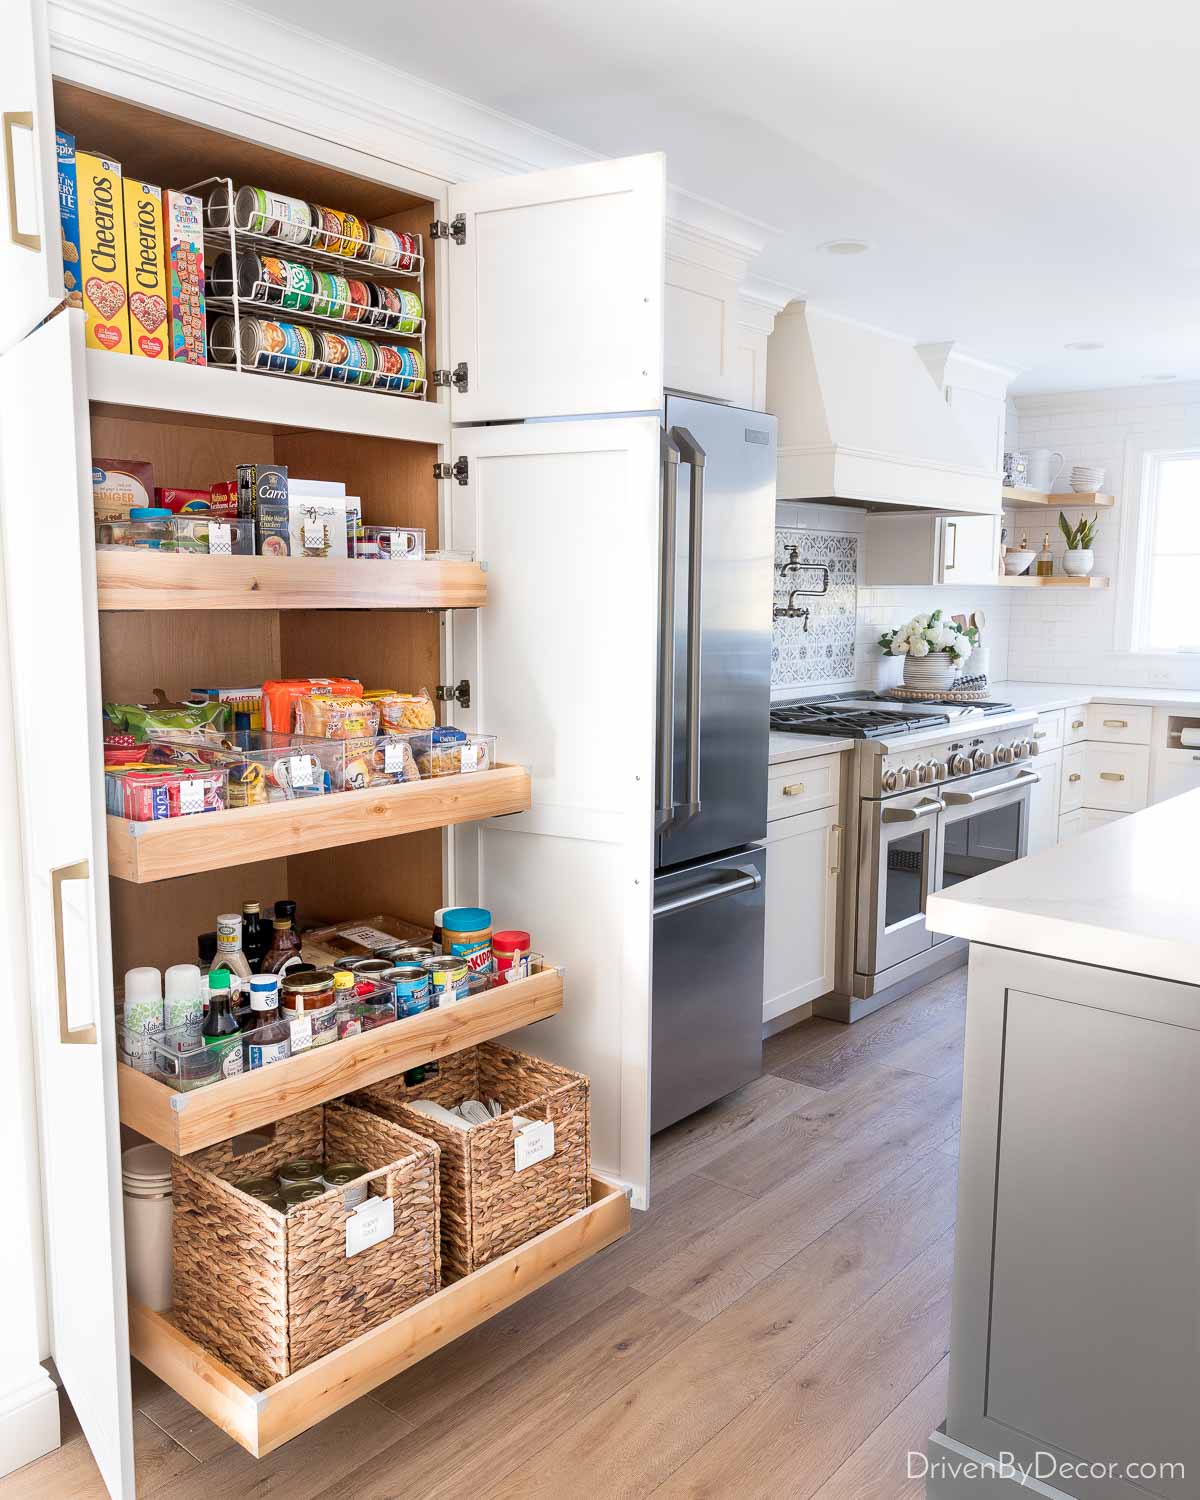 Our pantry cabinet with pull out shelves